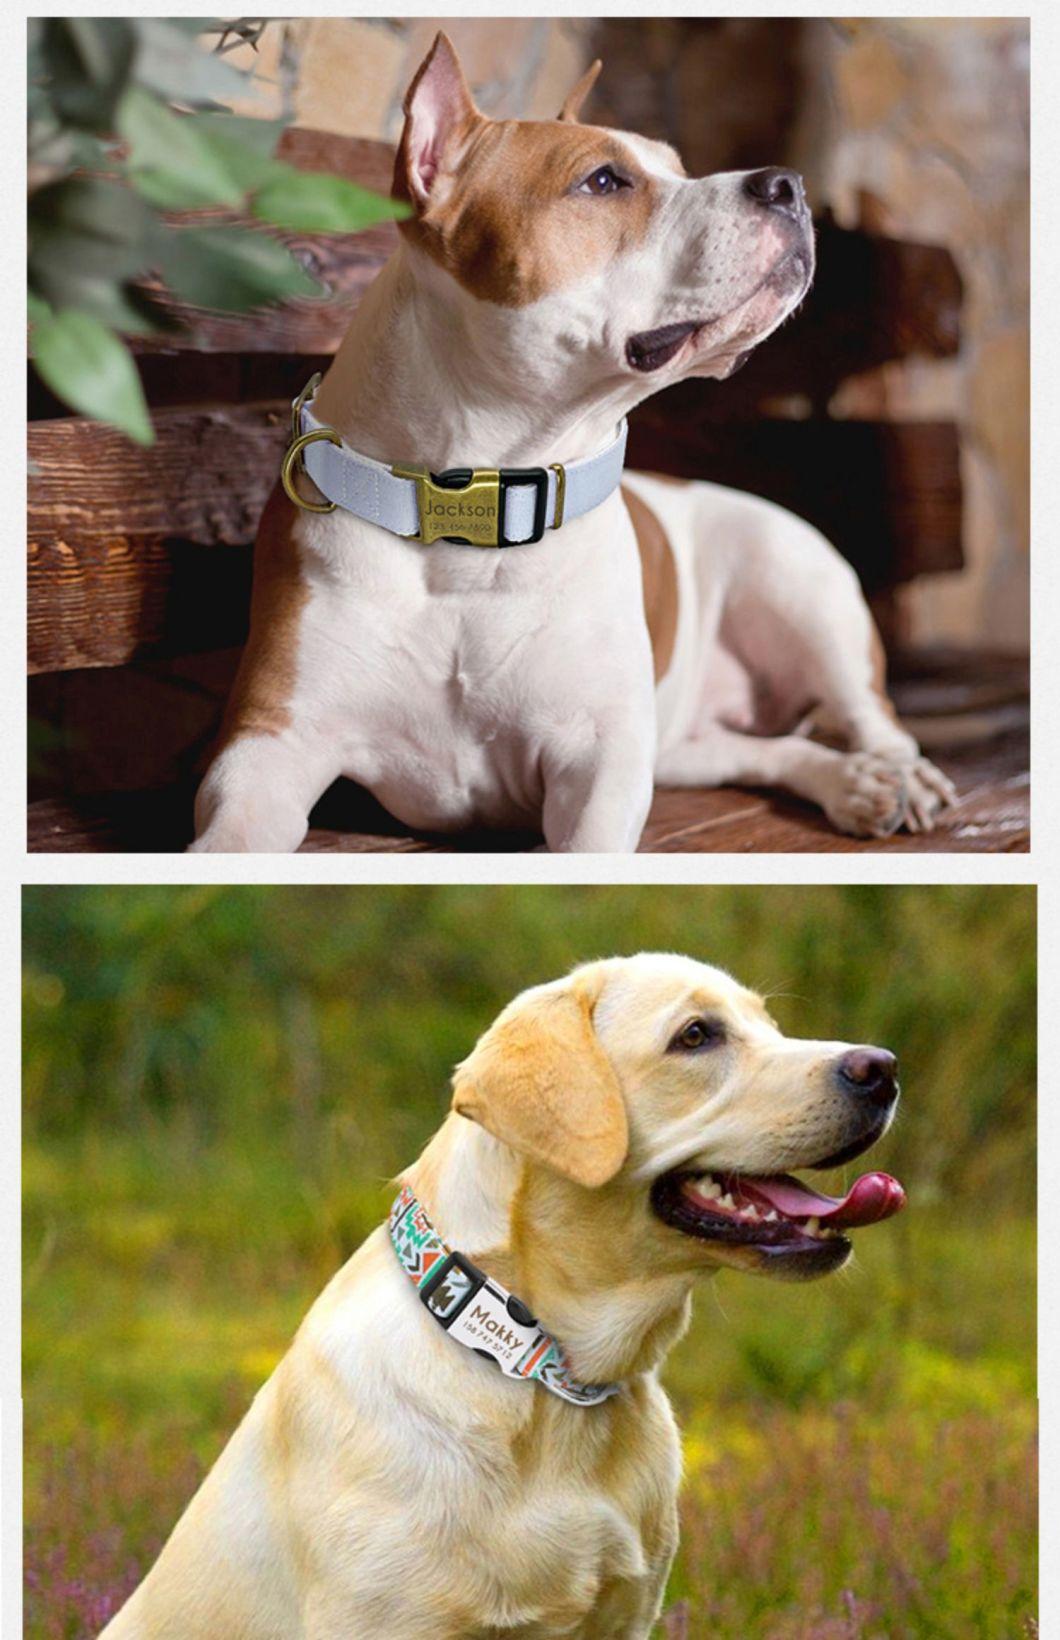 Professional Manufacturer Supplier Metal Buckles Custom Brand Name Stainless Steel Pet Neck Collar